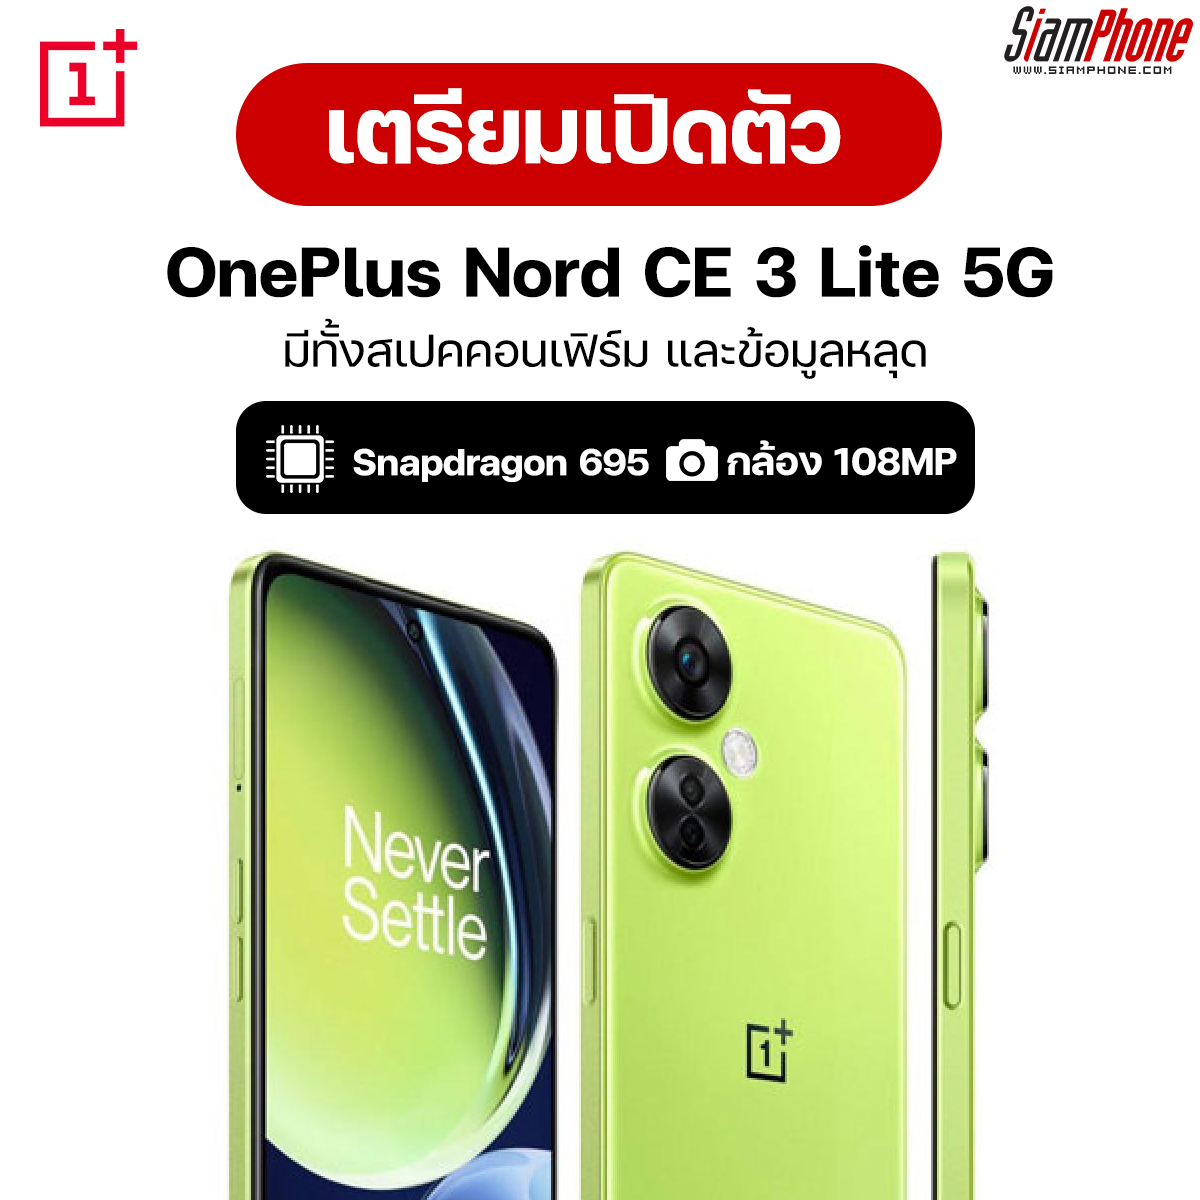 OnePlus Nord CE 3 Lite 5G is set to launch on April 4 with both confirmed specifications.  and leaked information